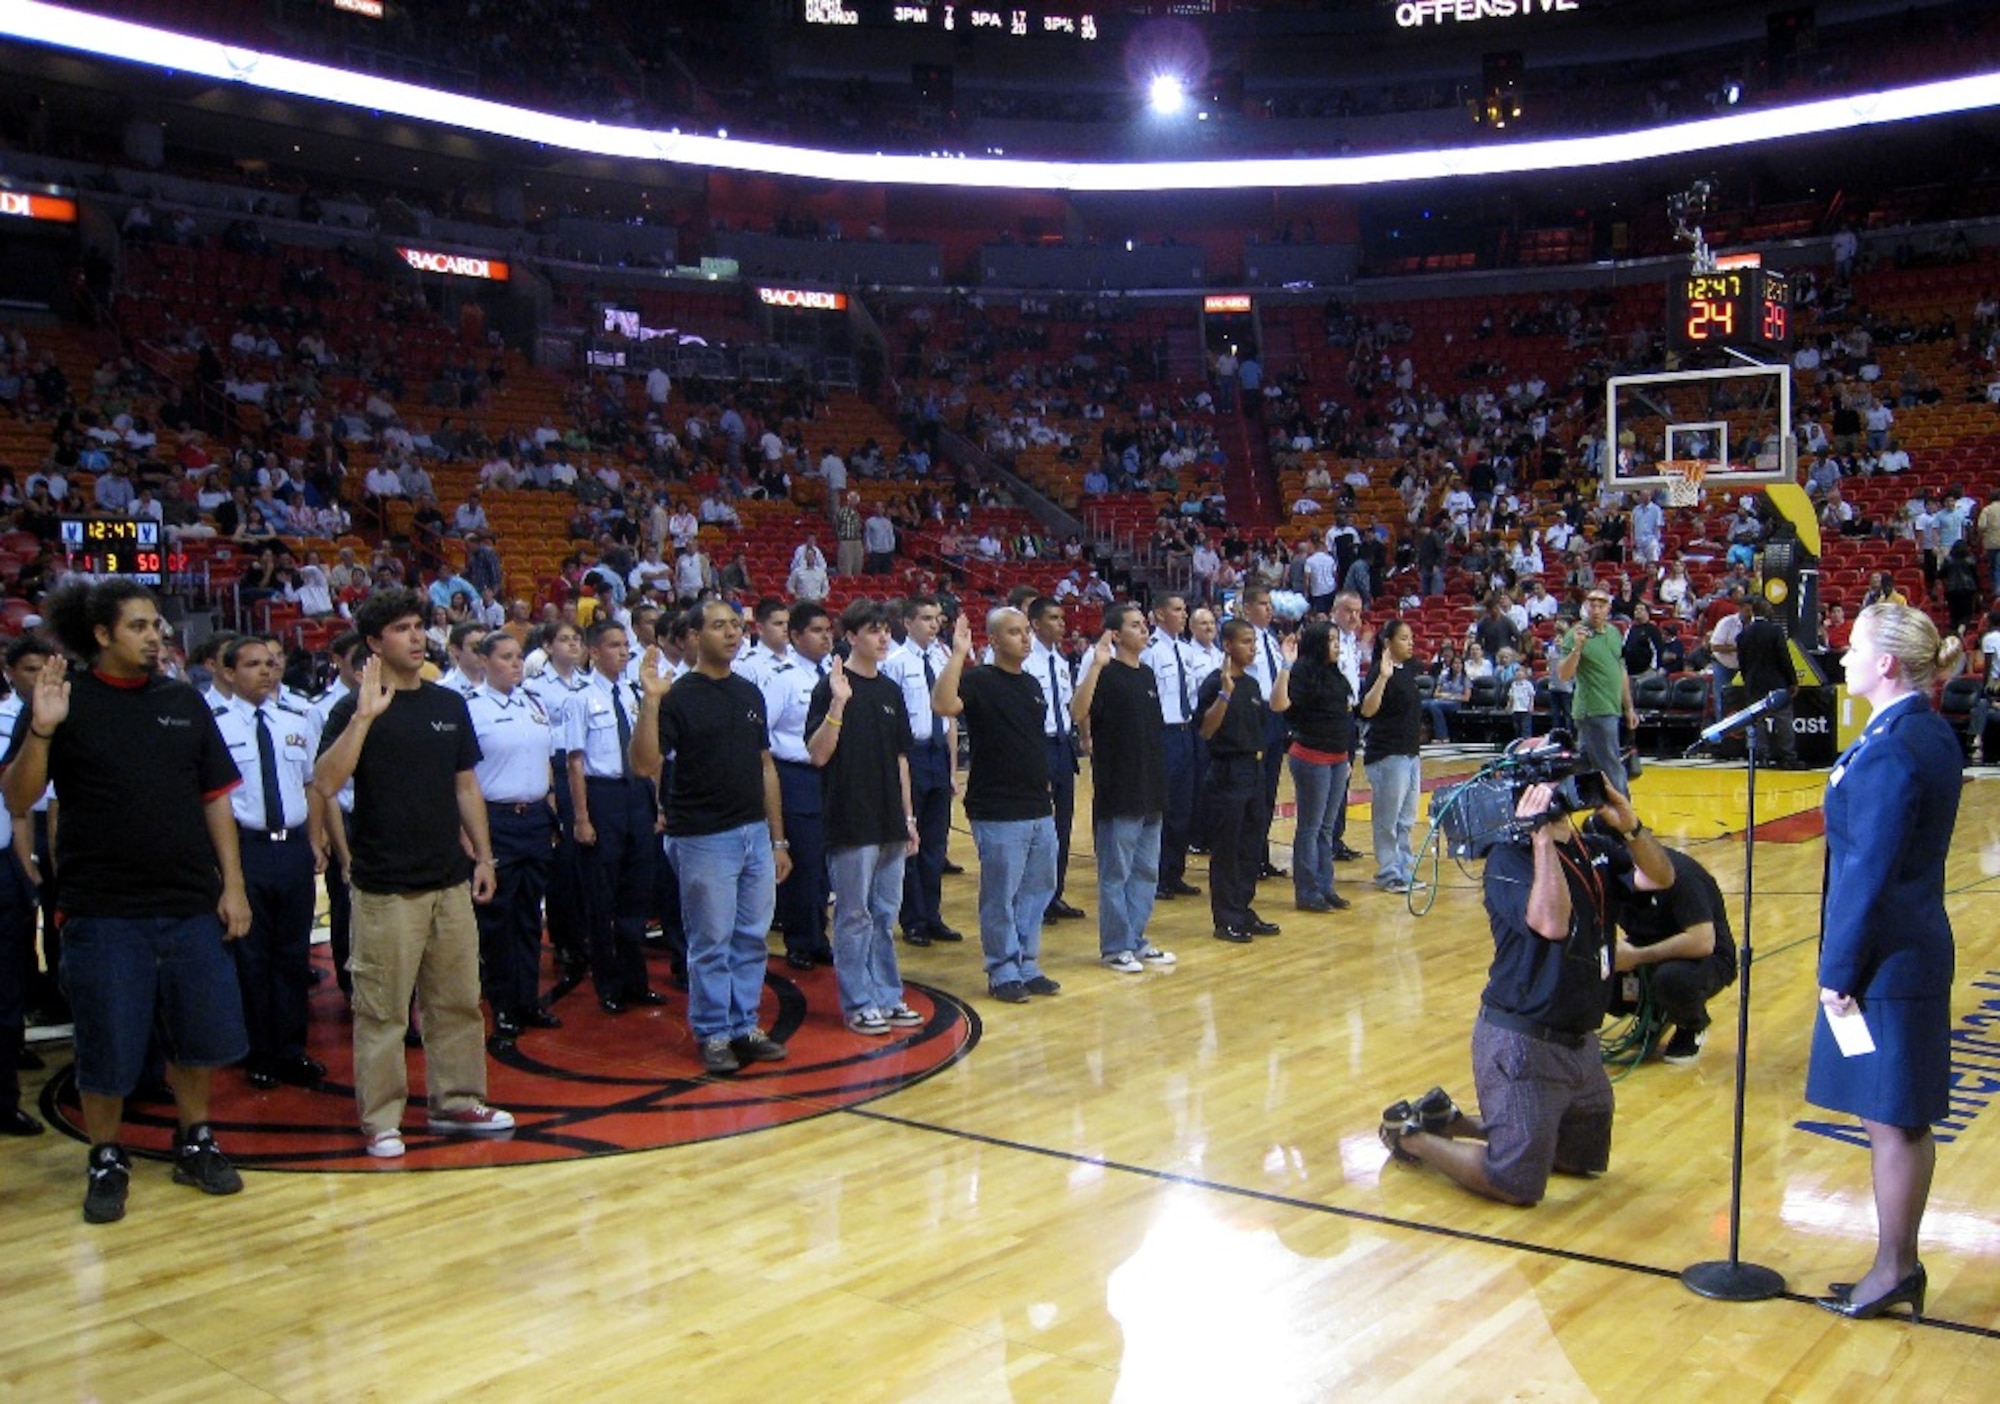 2nd Lt. Sabrina Ura, 482nd Mission Support Group executive officer, reads the oath of enlistment to 10 individuals joining the Air Force Reserve at “Air Force Reserve Night” during the Miami Heat game on March 14. The first-ever event, spearheaded by the 482nd Fighter Wing’s Recruiting Office, also featured the 482nd FW Honor Guard presenting the colors during the national anthem, and reservists volunteering at four informational kiosks scattered around the arena to help raise awareness about the Reserve. (U.S. Air Force photo/Staff Sgt. Leo Castellano)